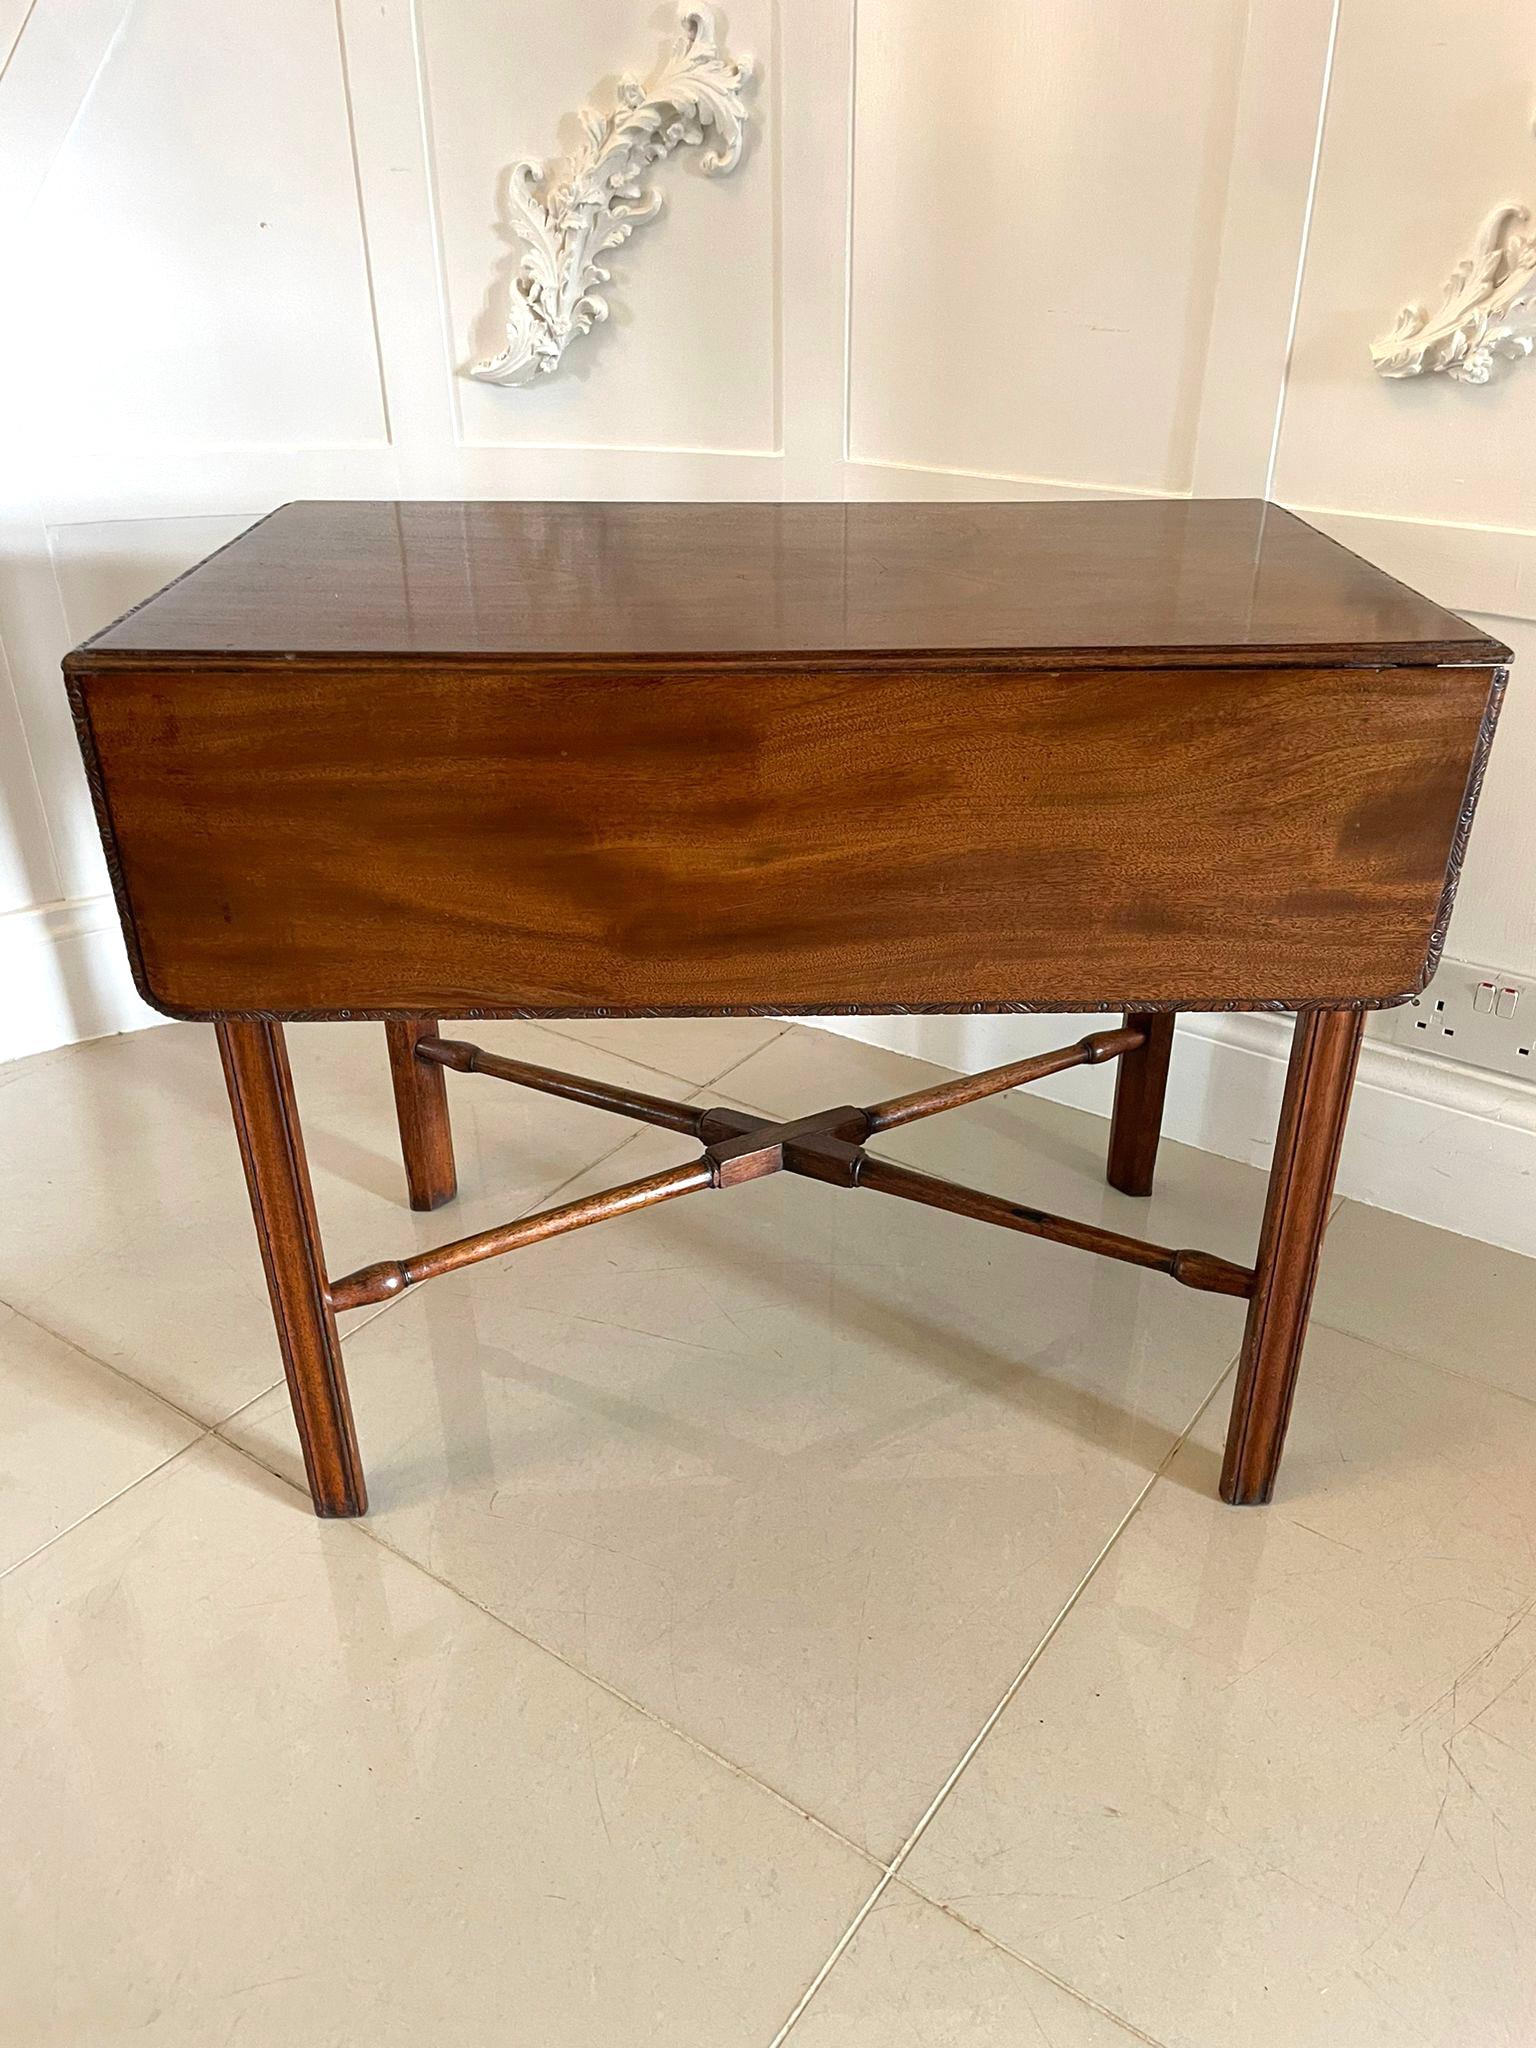 Fine antique 18th century Thomas Chippendale childs mahogany Pembroke table having twin flaps that boast rounded corners and splendid carved edges above a single frieze drawer with original brass handle. It is raised on moulded square chamfered legs